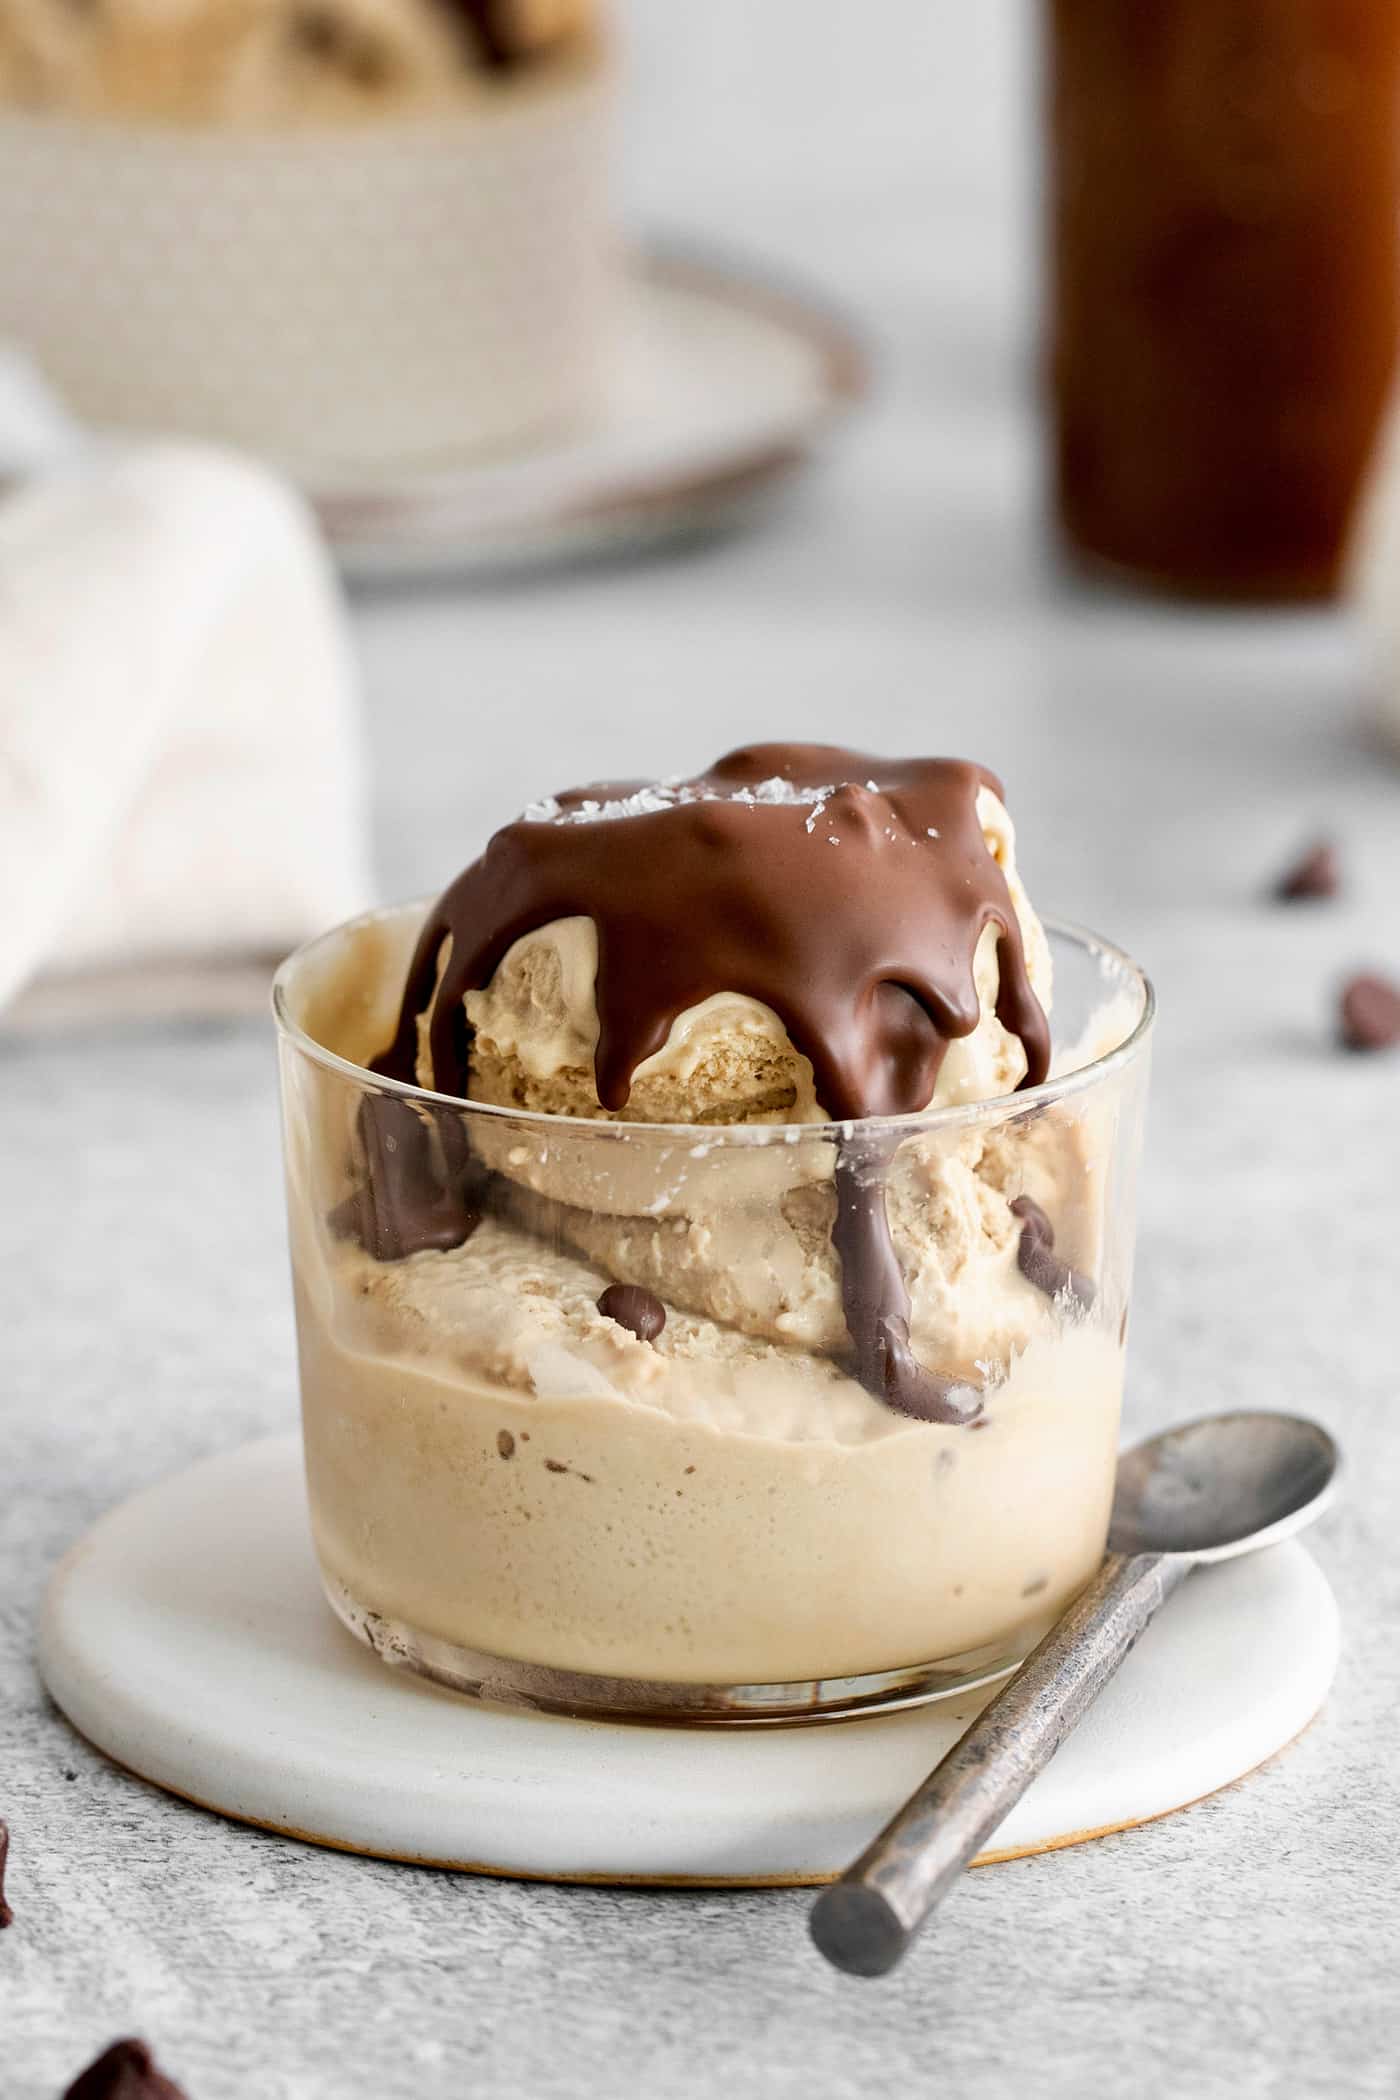 A clear bowl of ice cream topped with chocolate magic shell.